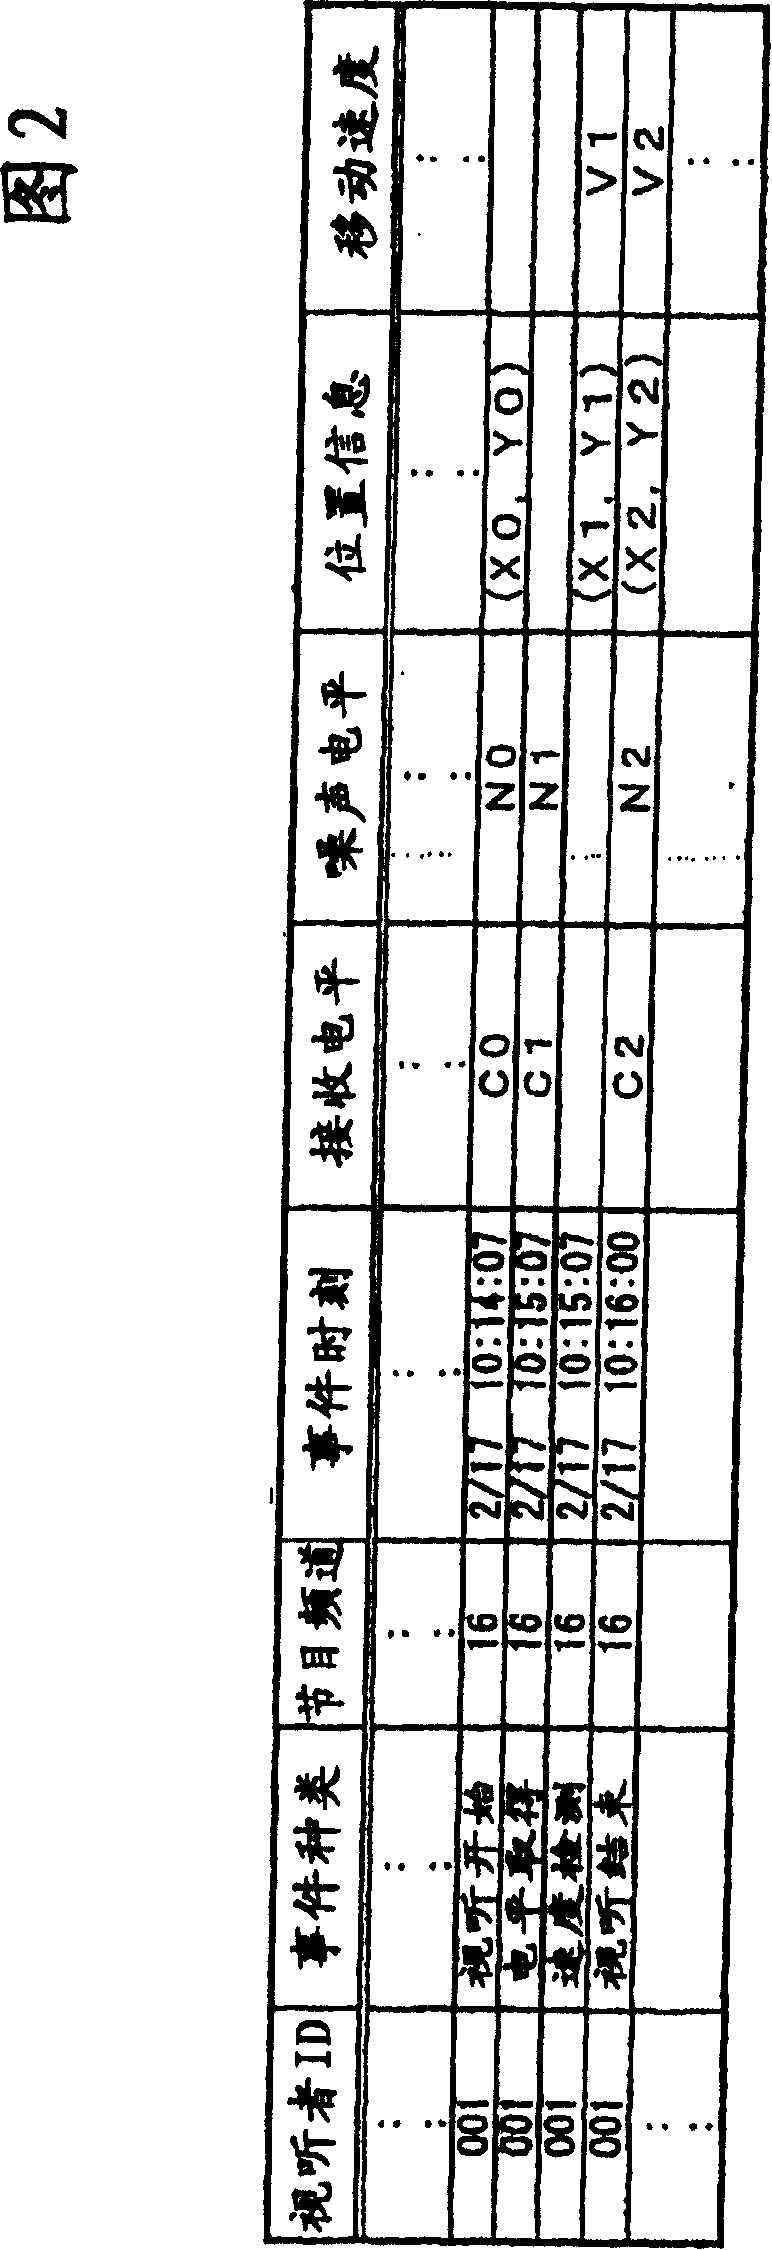 Mobile terminal, audience information collection system, and audience information collection method